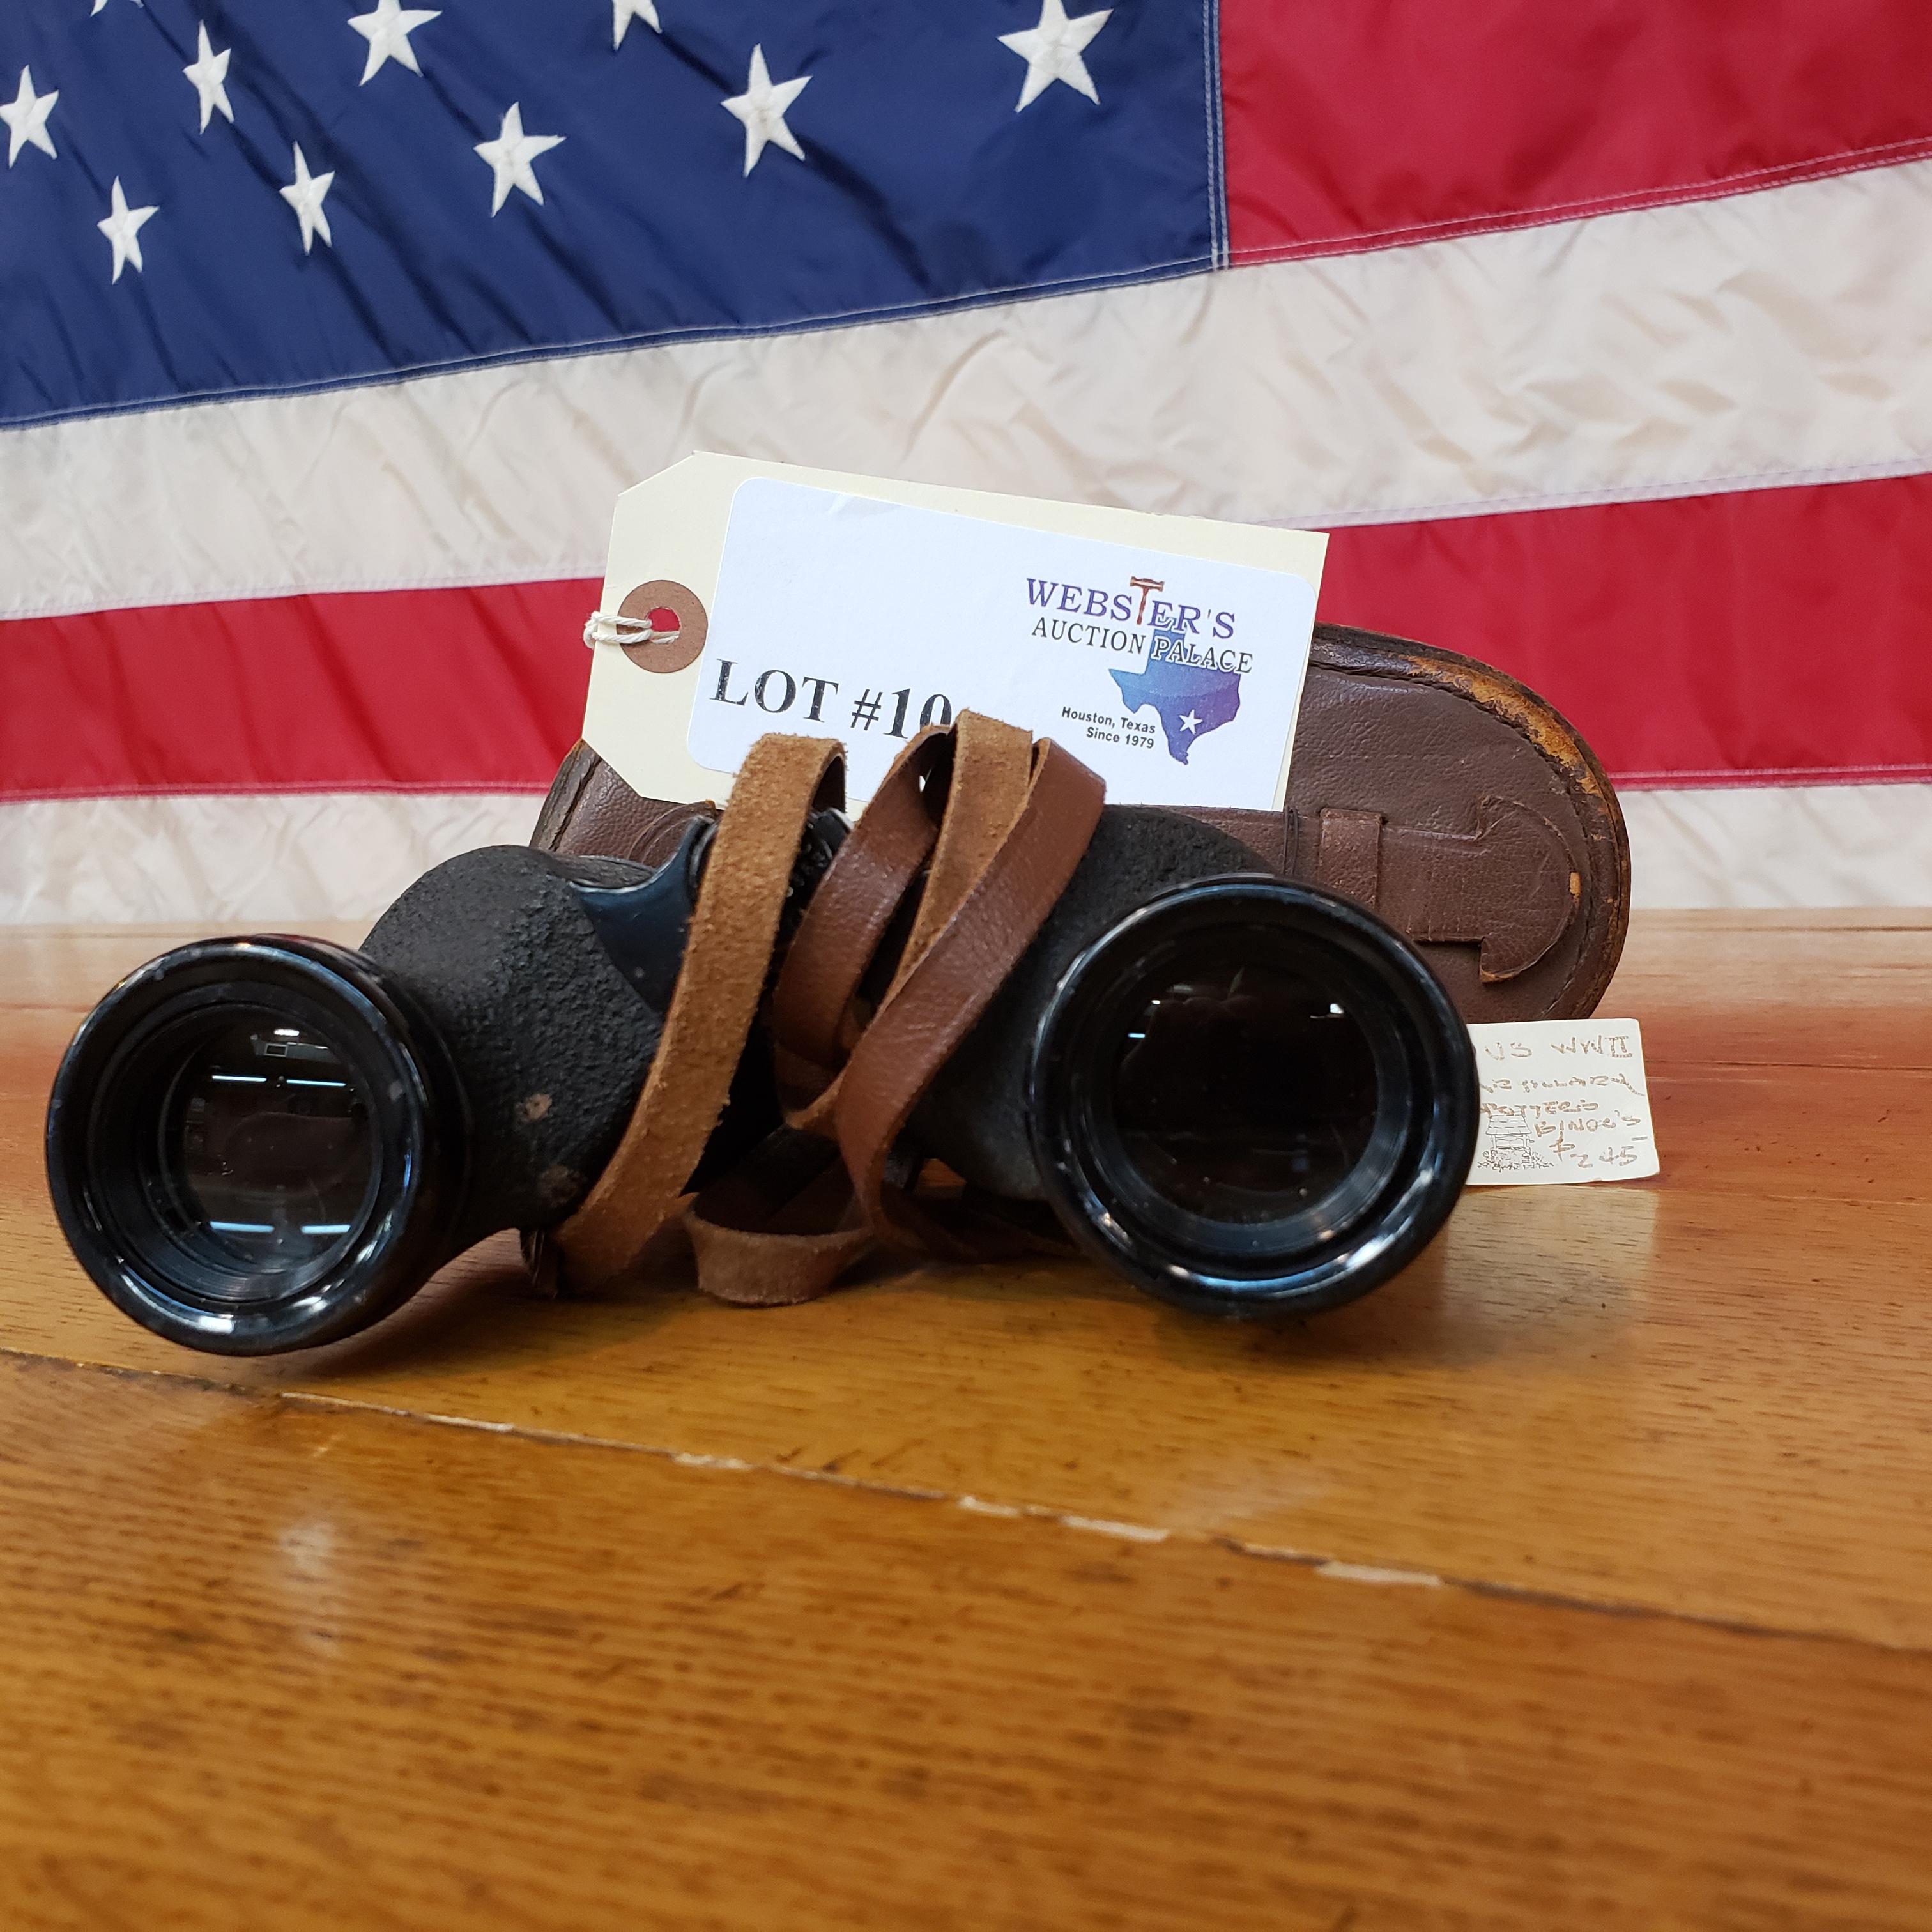 WWII WESTINGHOUSE BINOCULARS M3 6X30 DATED 1942 WITH LEATHER CASE